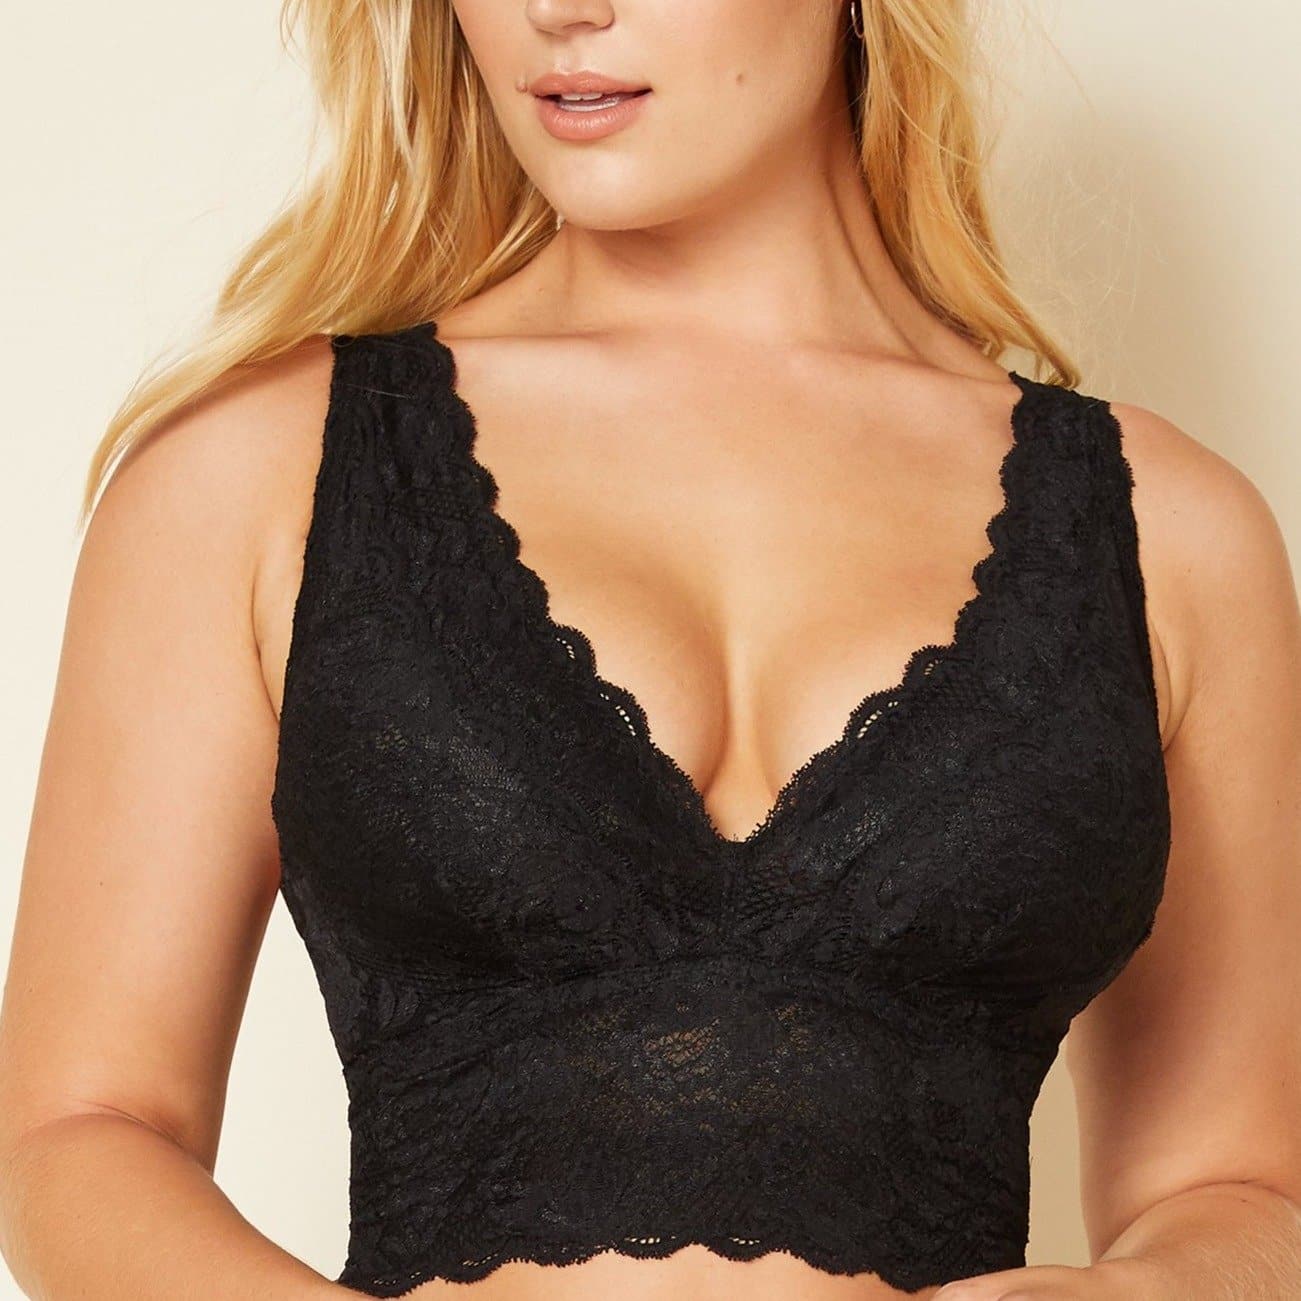 Cosabella Never Say Never CURVY Plungie Longline Bralette in Black NEVER1385-Bralette-Cosabella-Black-Large-Anna Bella Fine Lingerie, Reveal Your Most Gorgeous Self!